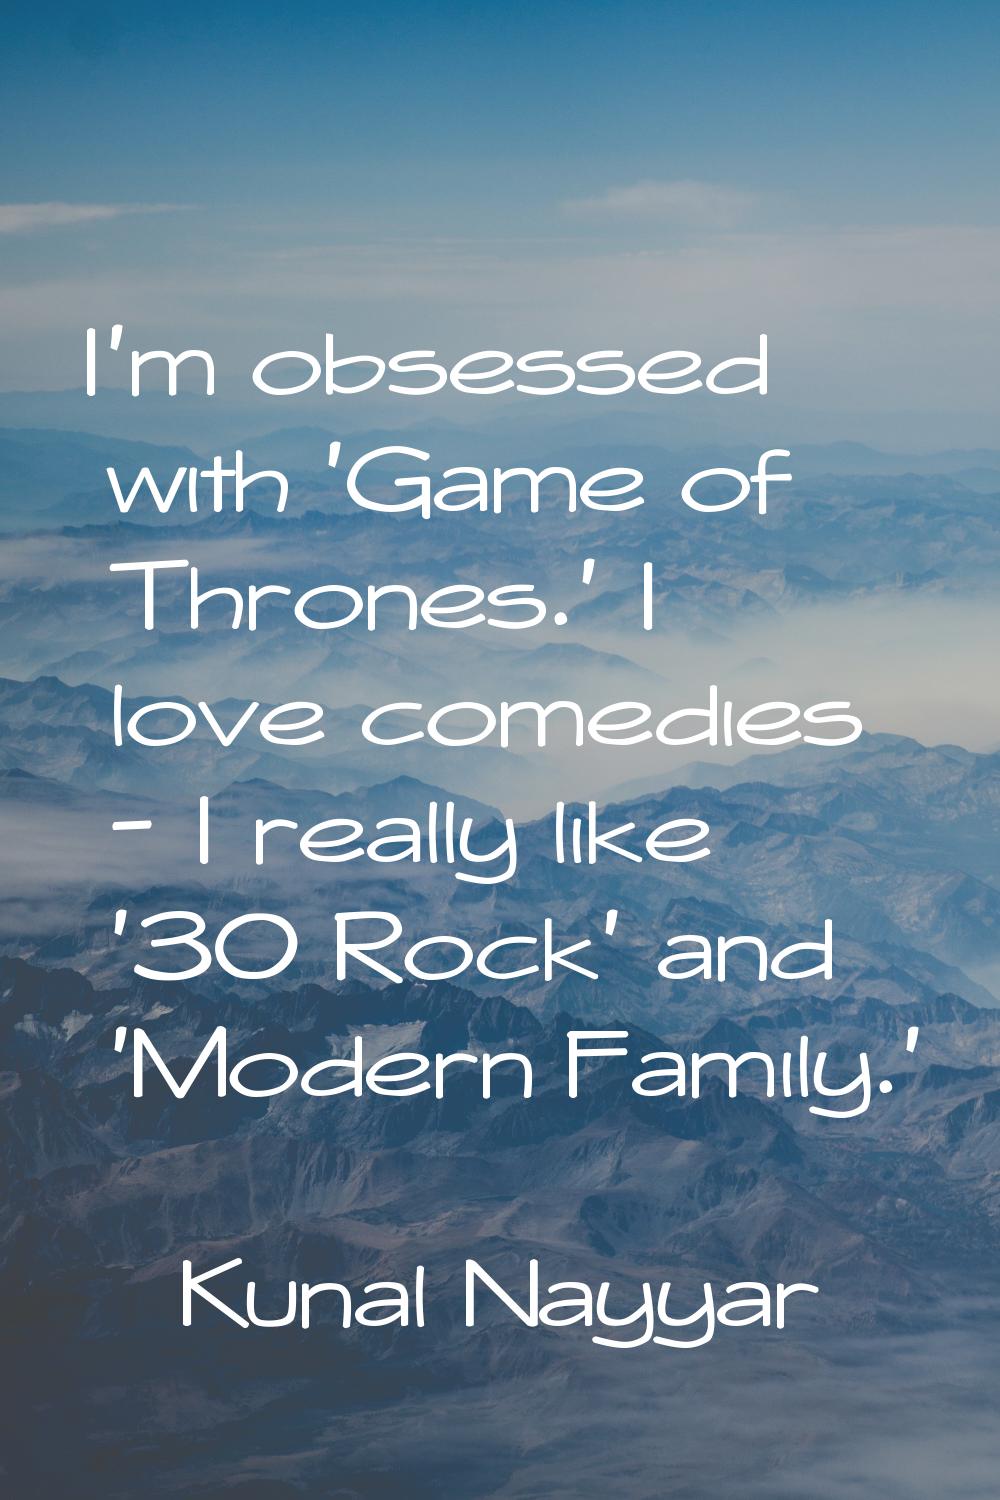 I'm obsessed with 'Game of Thrones.' I love comedies - I really like '30 Rock' and 'Modern Family.'